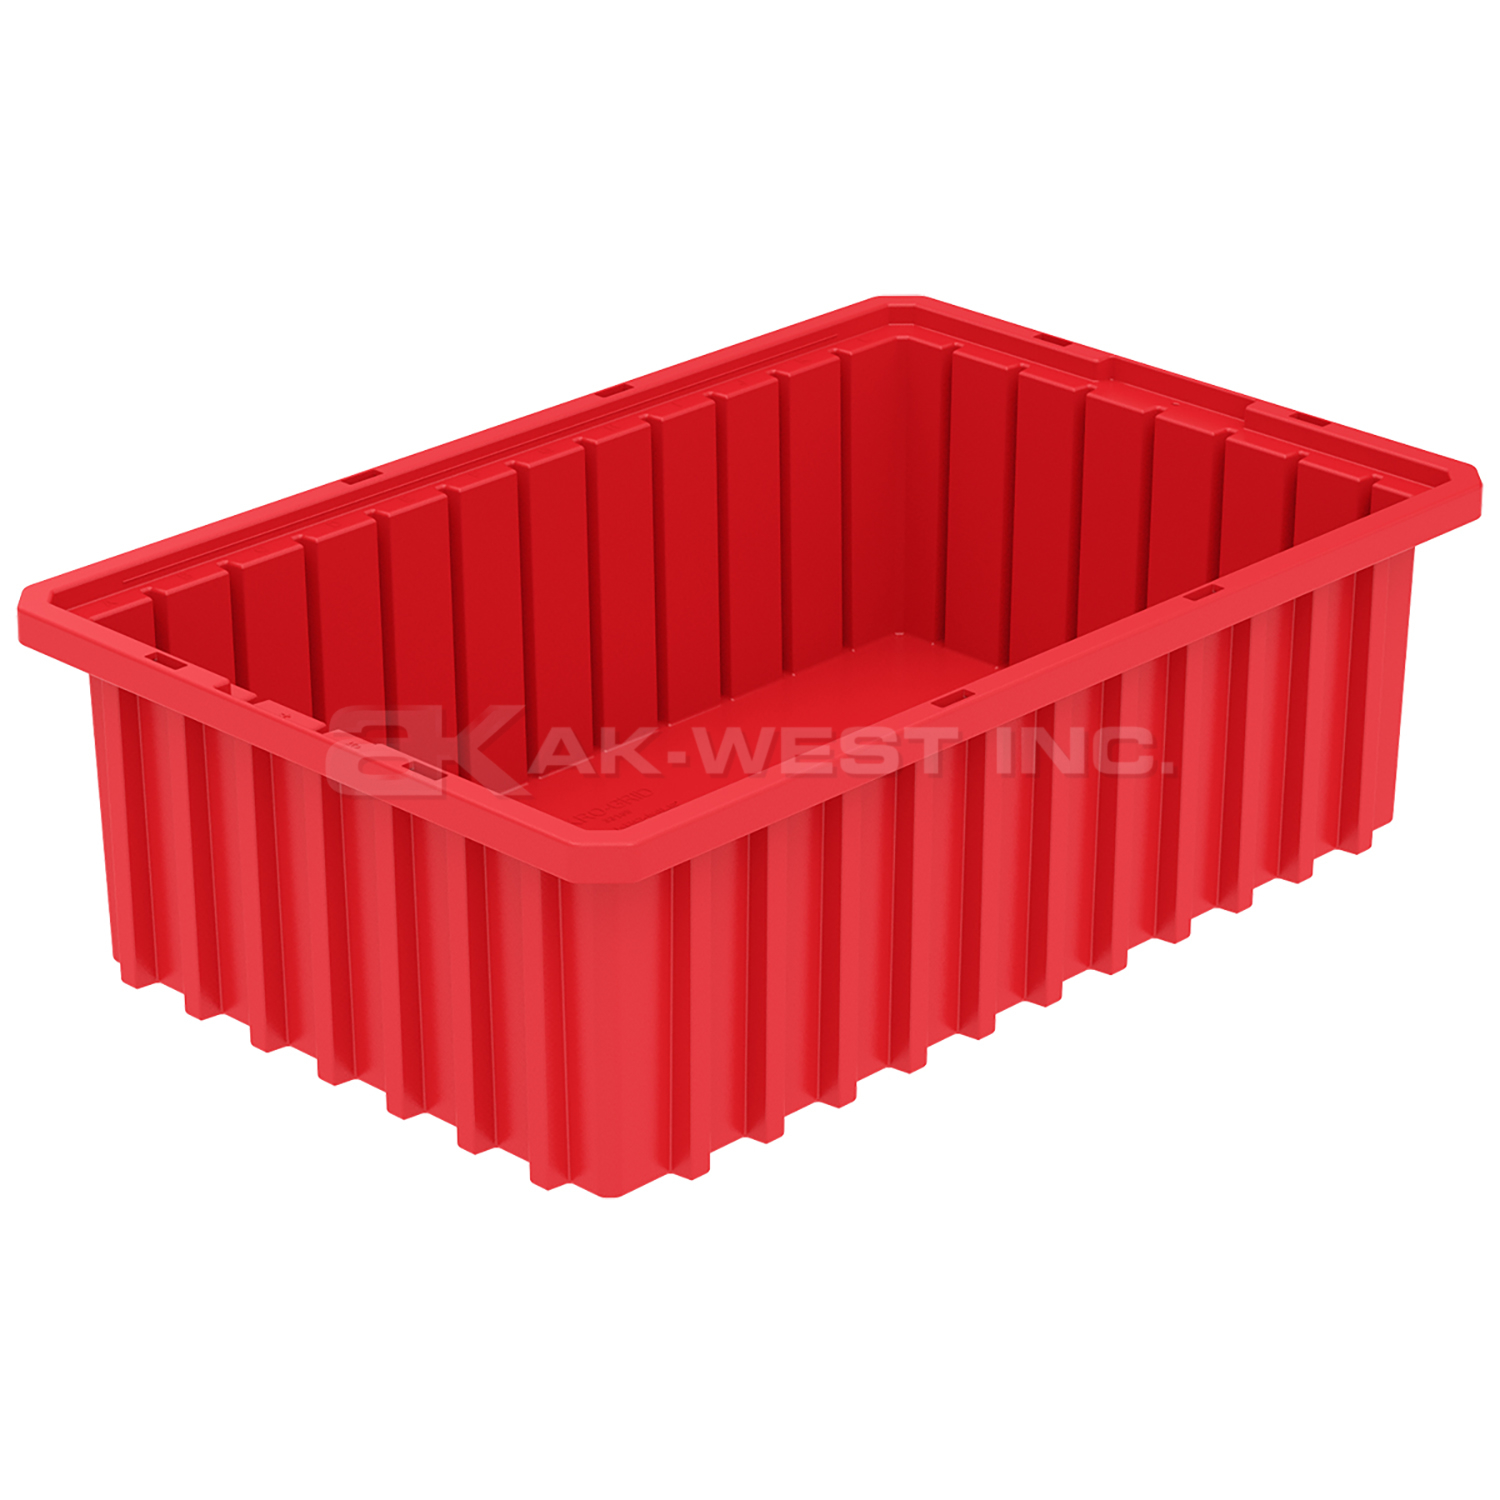 Red, 16-1/2" x 10-7/8" x 5" Dividable Grid Container (12 Per Carton)